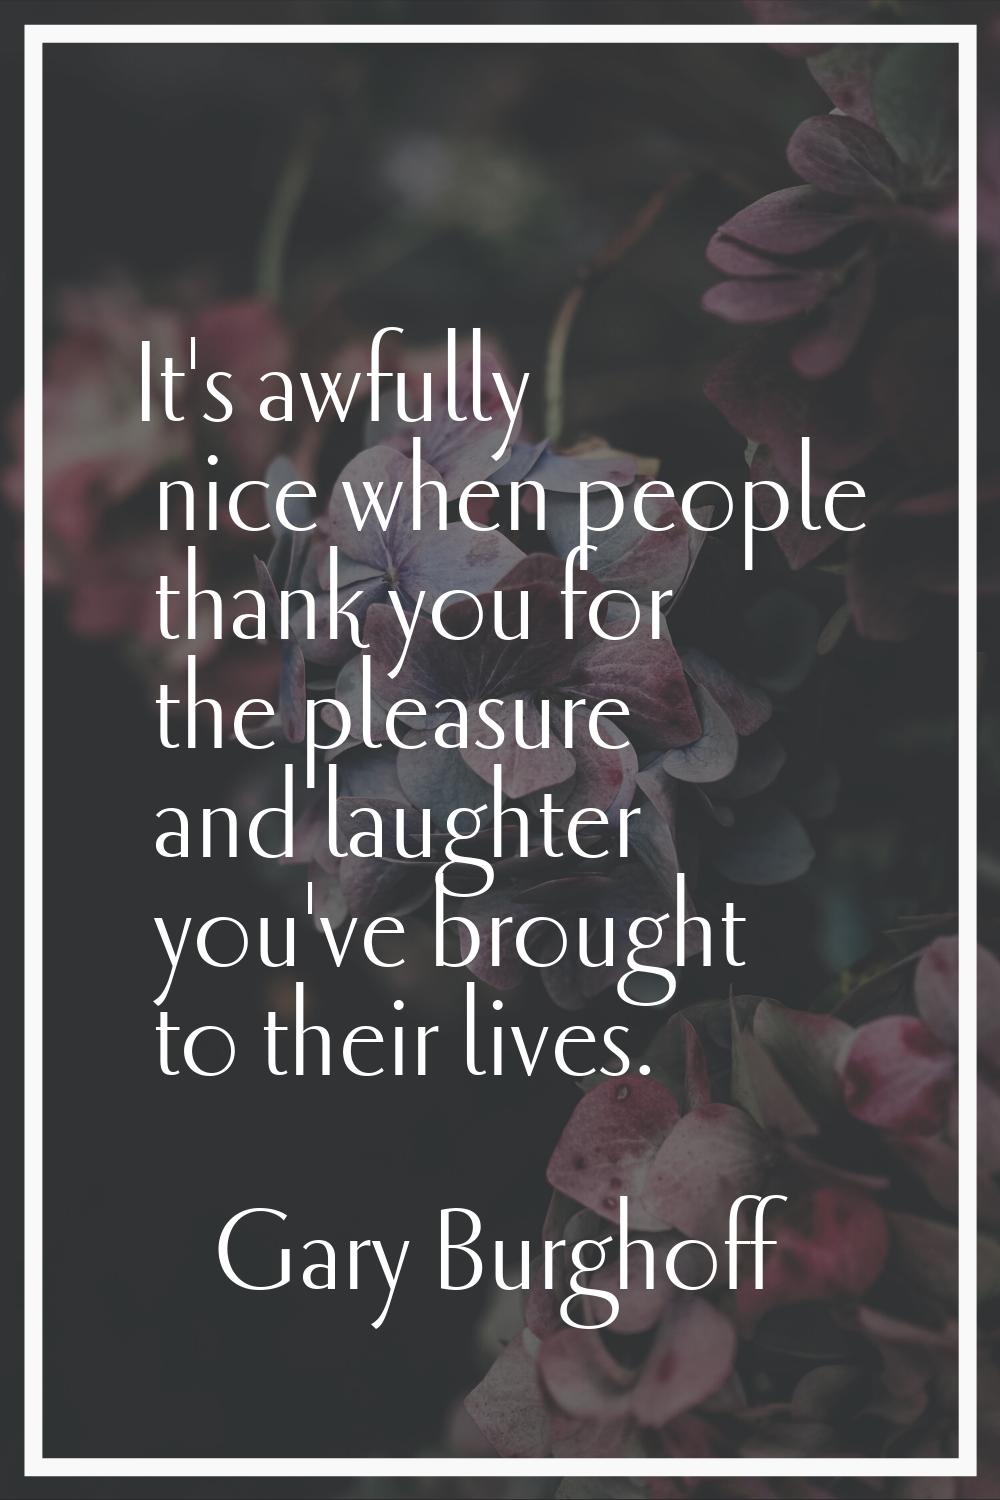 It's awfully nice when people thank you for the pleasure and laughter you've brought to their lives